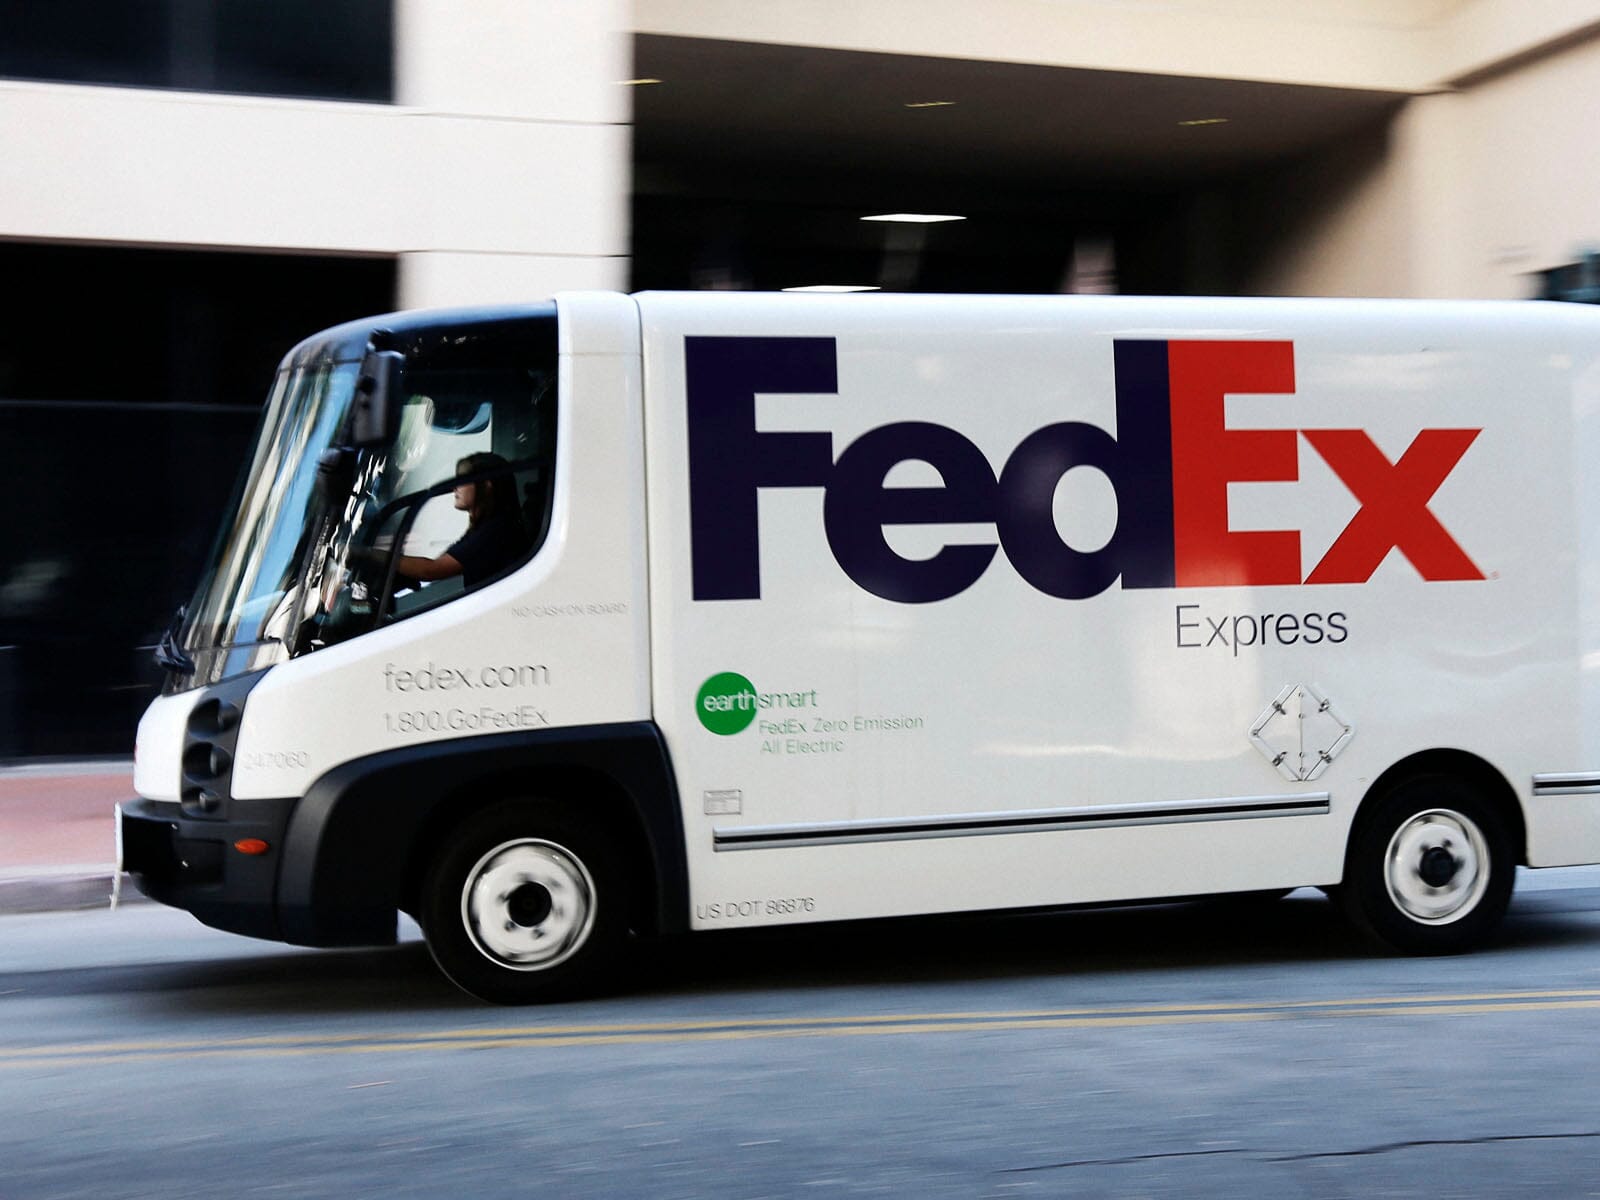 B&S Shipping Fedex is now 1 click away